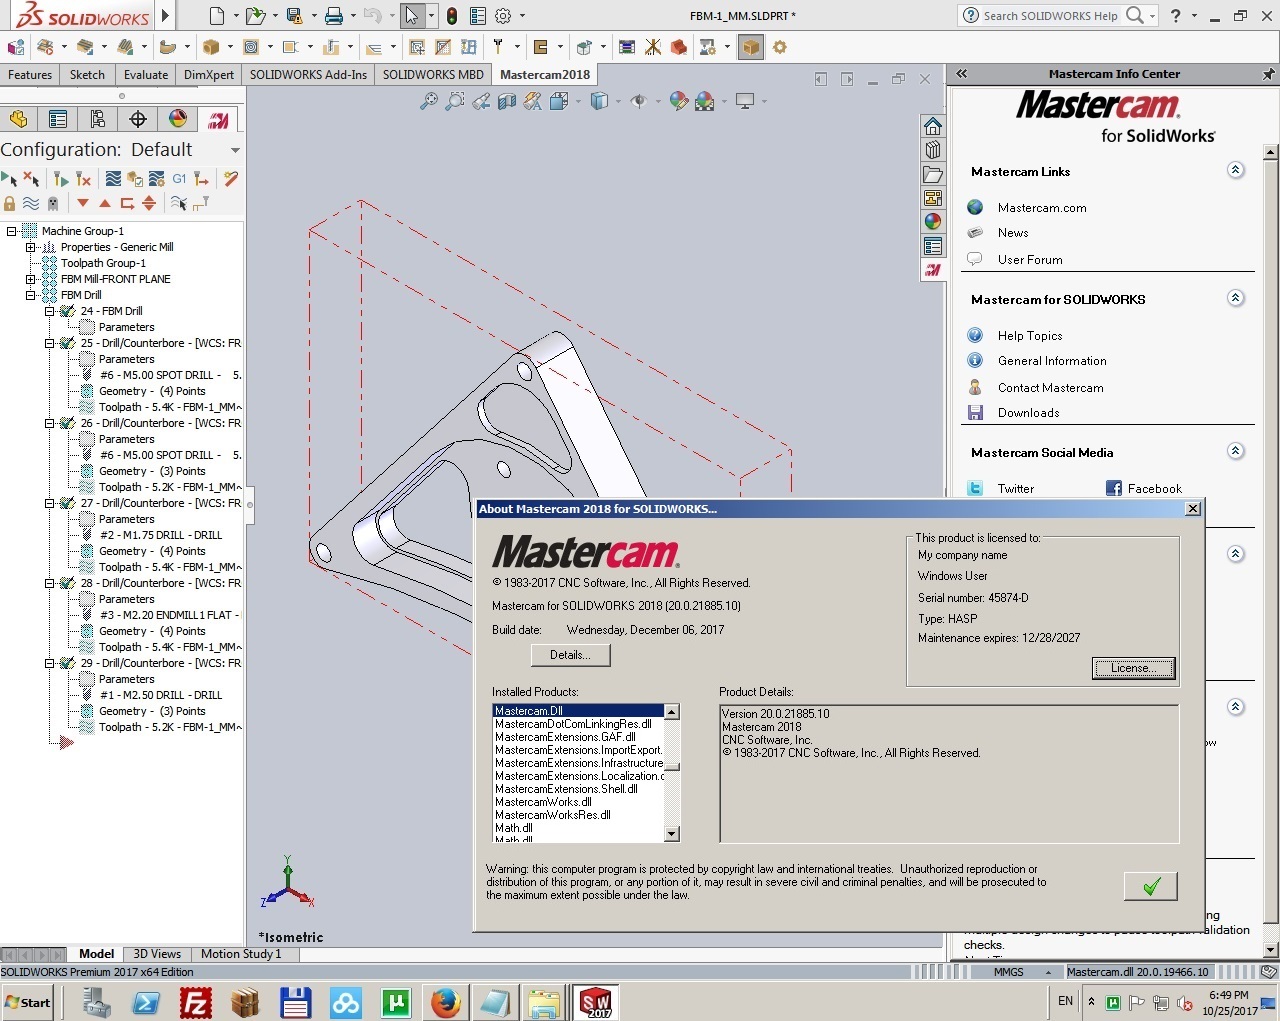 Programming with Mastercam 2018 Update3 only (v20.0.21855.10) for SolidWorks full